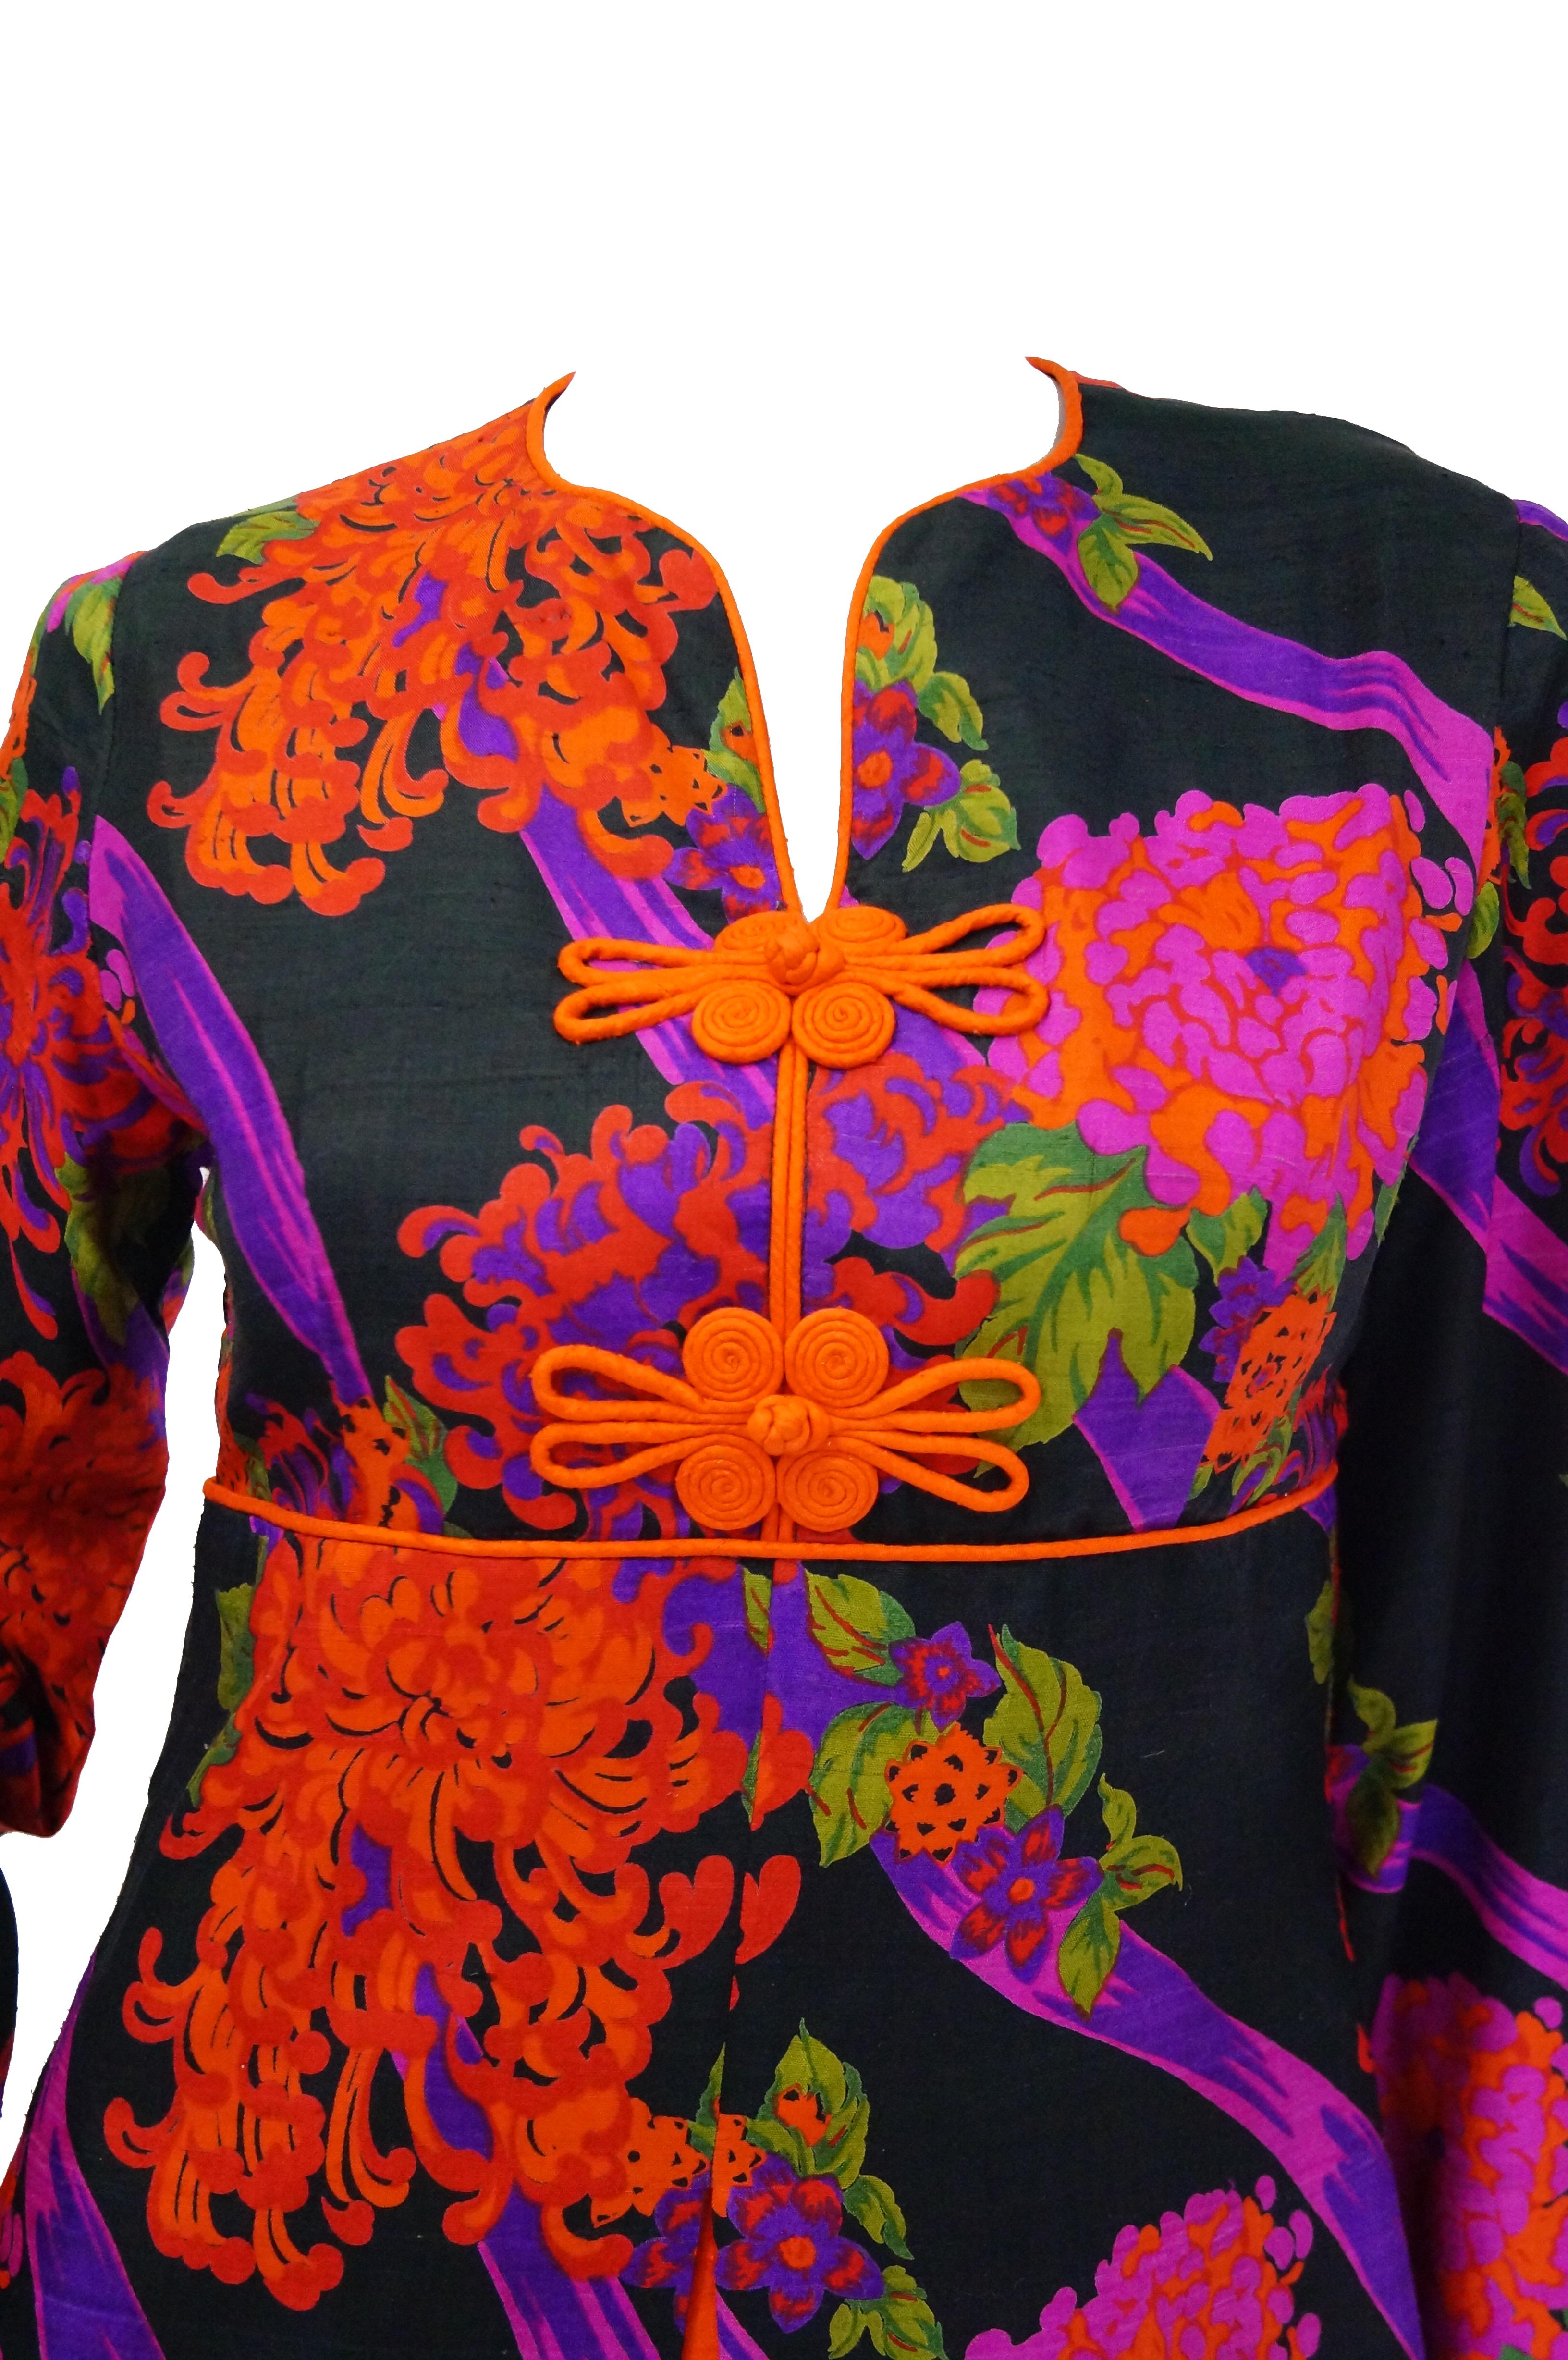 Stunning colorful floral dress made of smooth Thai silk. The dress is maxi length, with long, loose sleeves, an empire silhouette, and a high neckline with narrow V - neck slit. The print of the dress is just fantastic - chrysanthemums in neon pinks